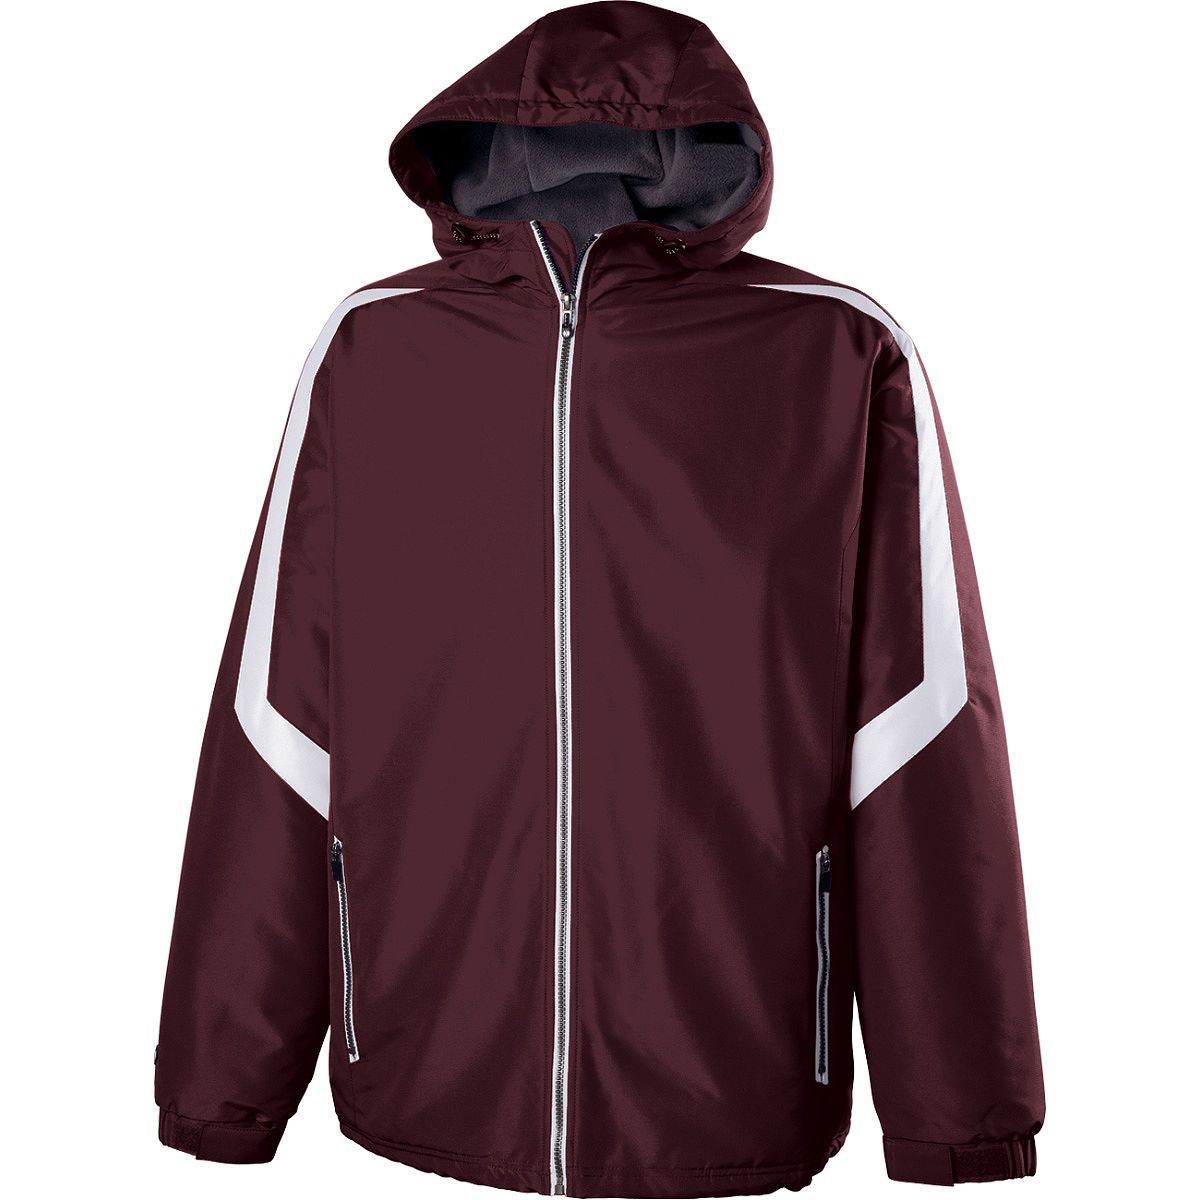 Holloway Sportswear L Charger Jacket Maroon/White 229059 - image 1 of 4